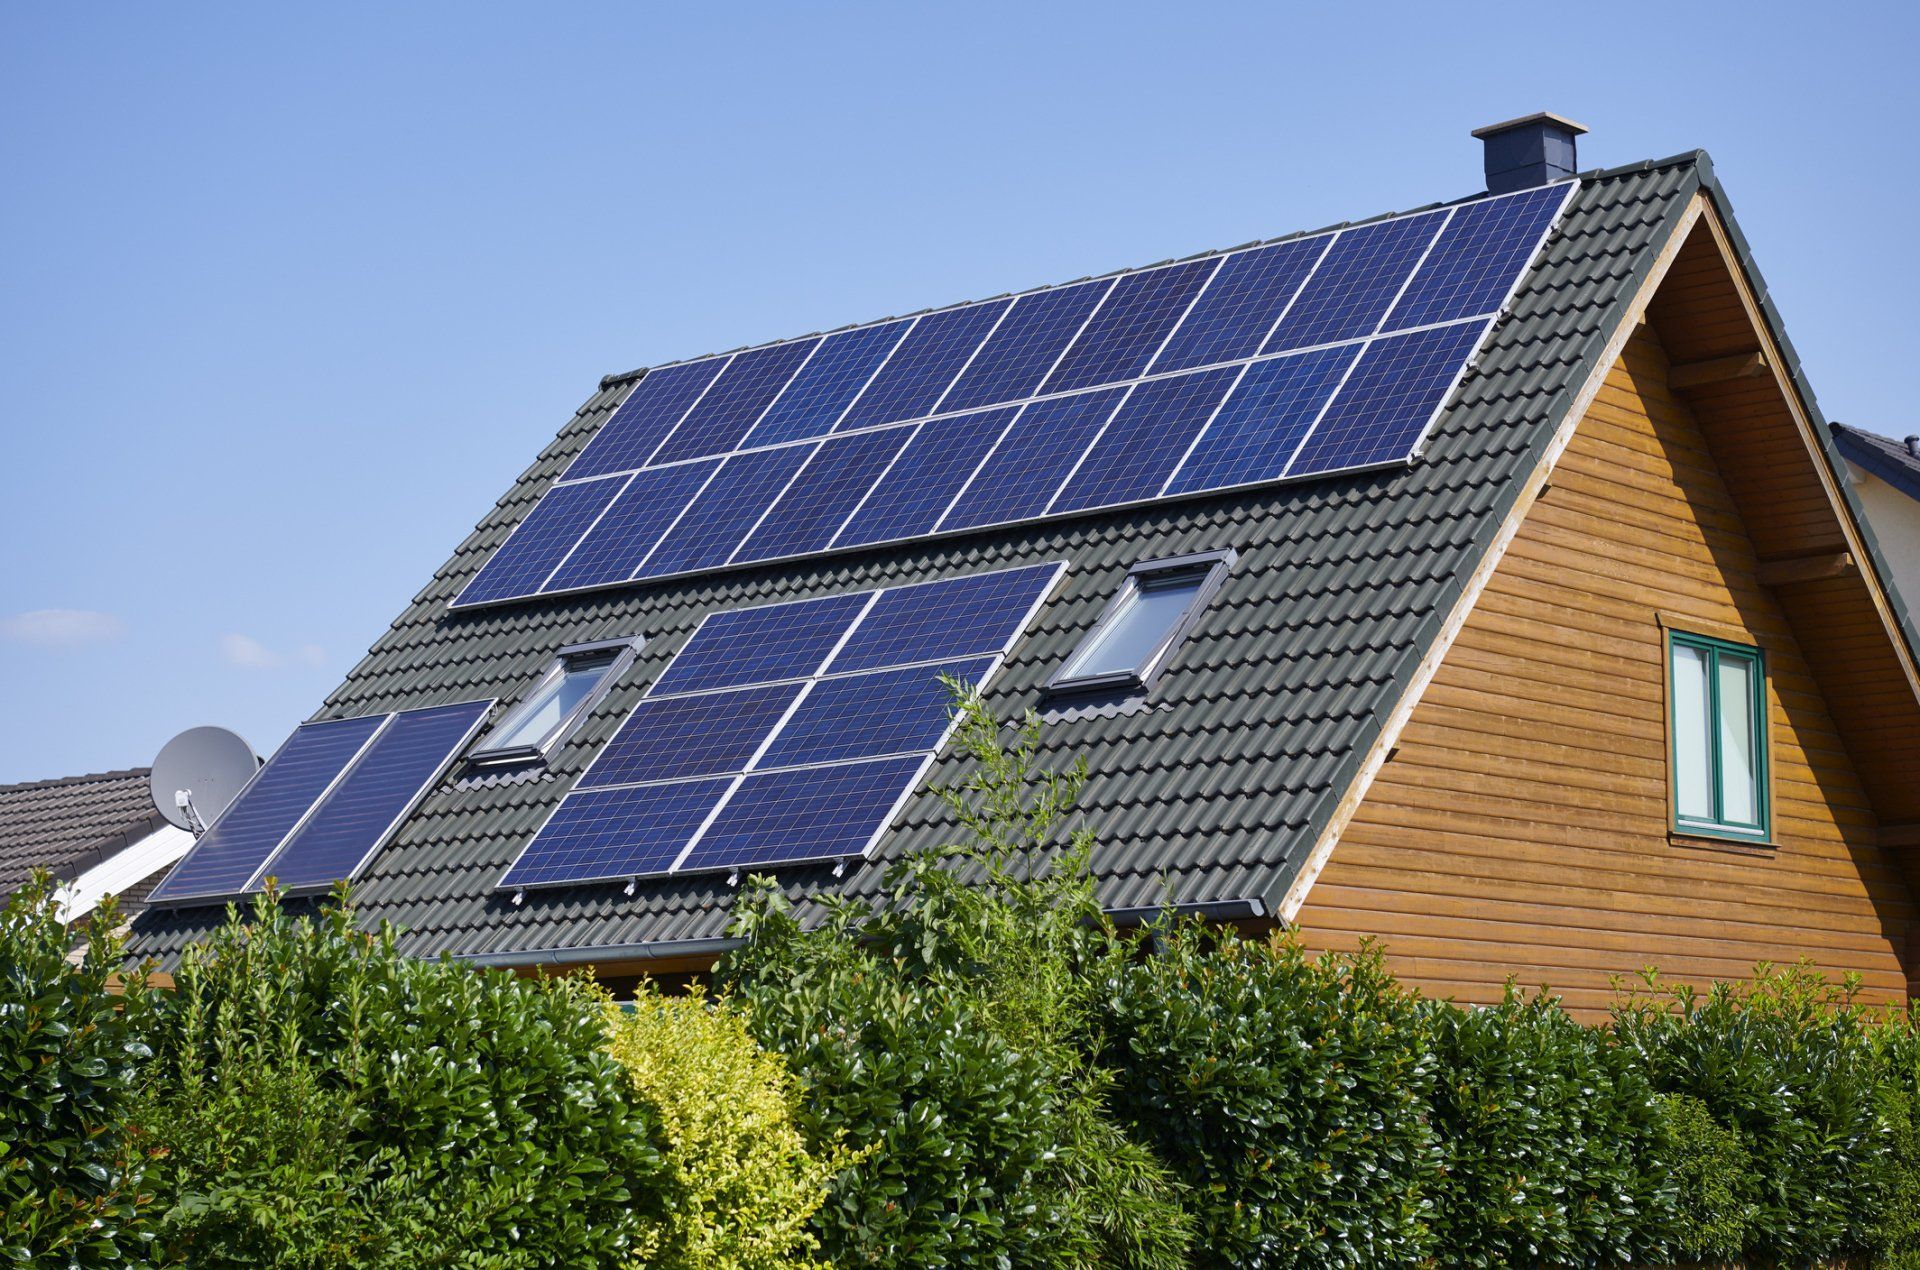 Residential Home With Solar Panel